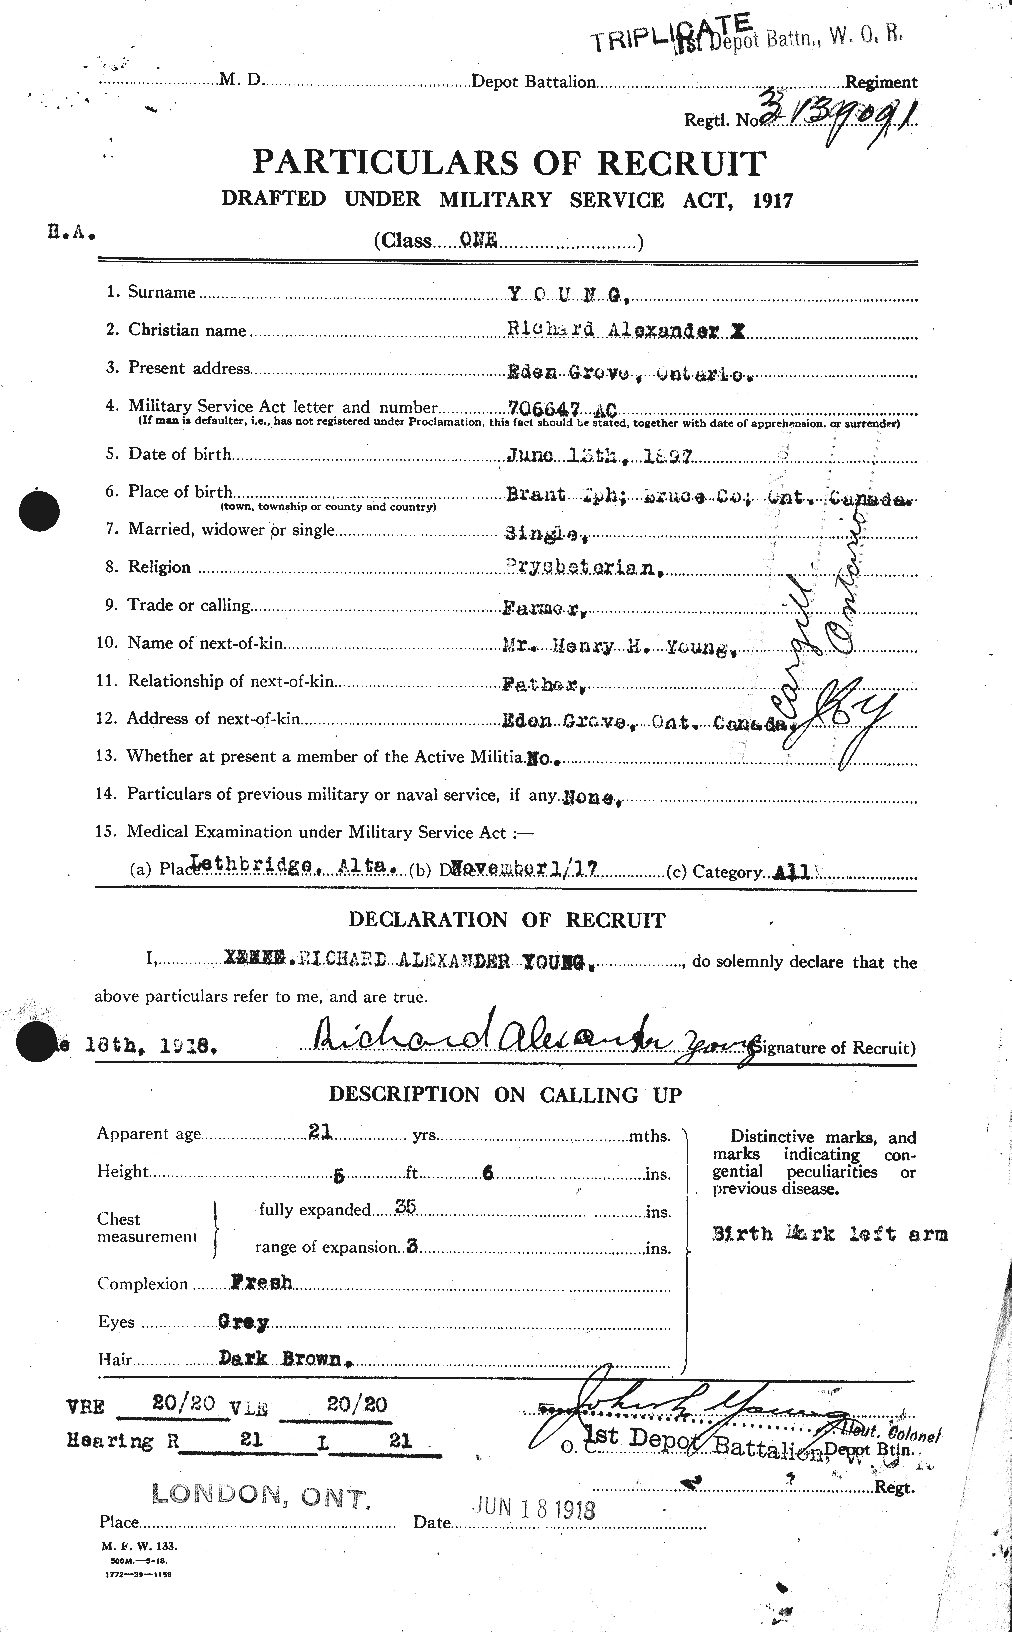 Personnel Records of the First World War - CEF 692130a